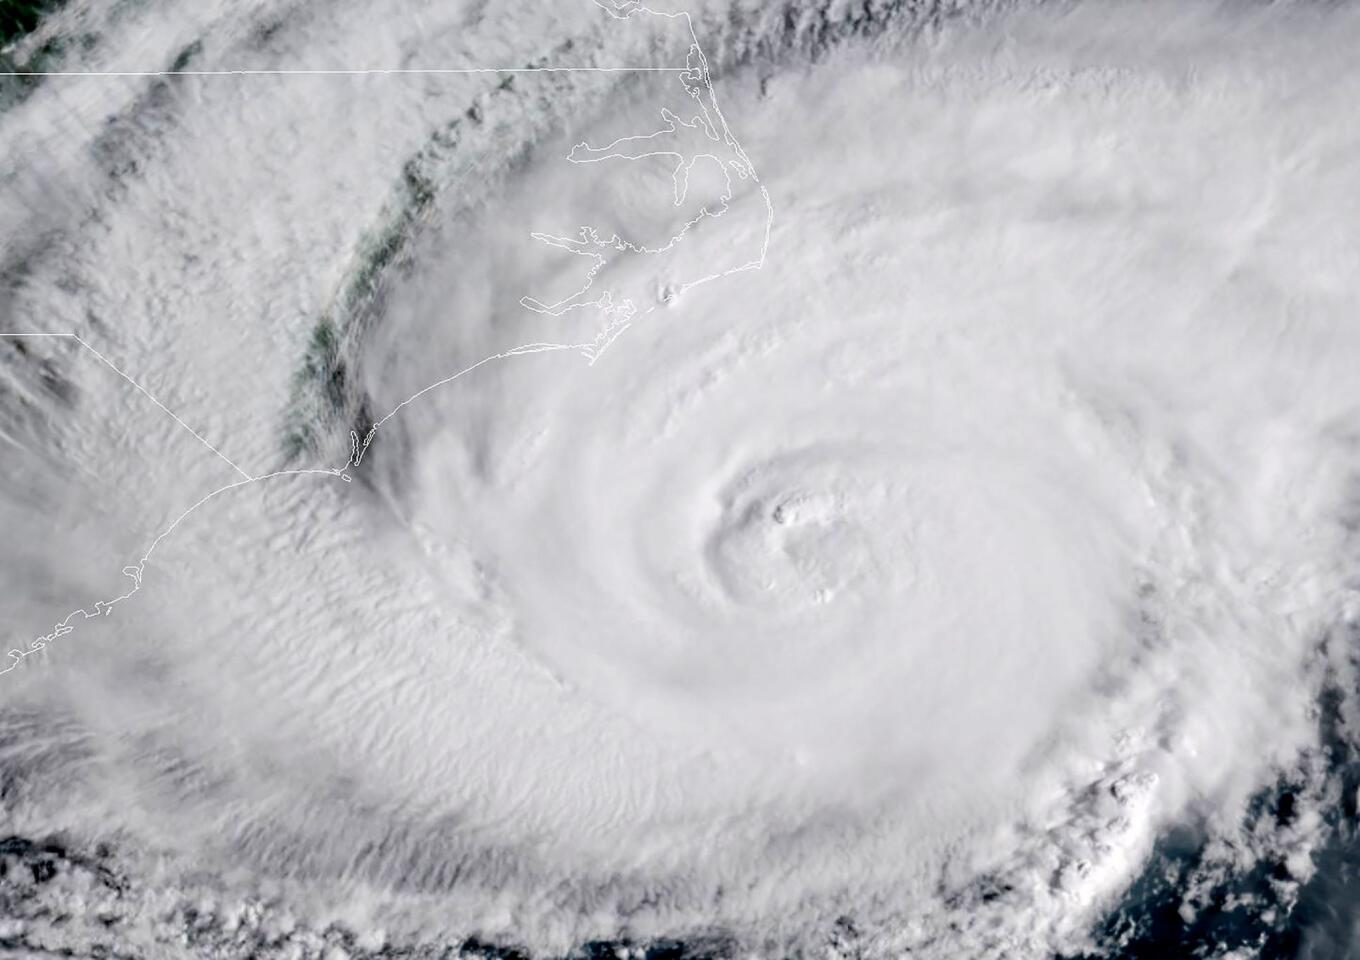 This NOAA/RAMMB satellite image taken at 13:15 UTC on September 13, 2018, shows Hurricane Florence beginning to hit the US east coast. - Florence edged closer to the east coast of the US Thursday, with tropical-force winds and rain already lashing barrier islands just off the North Carolina mainland. The huge storm weakened to a Category 2 hurricane overnight, but forecasters warned that it still packed a dangerous punch, 110 mile-an-hour (175 kph) winds and torrential rains. (Photo by Jose ROMERO / NOAA/RAMMB / AFP) / RESTRICTED TO EDITORIAL USE - MANDATORY CREDIT "AFP PHOTO / NOAA/RAMMB" - NO MARKETING NO ADVERTISING CAMPAIGNS - DISTRIBUTED AS A SERVICE TO CLIENTSJOSE